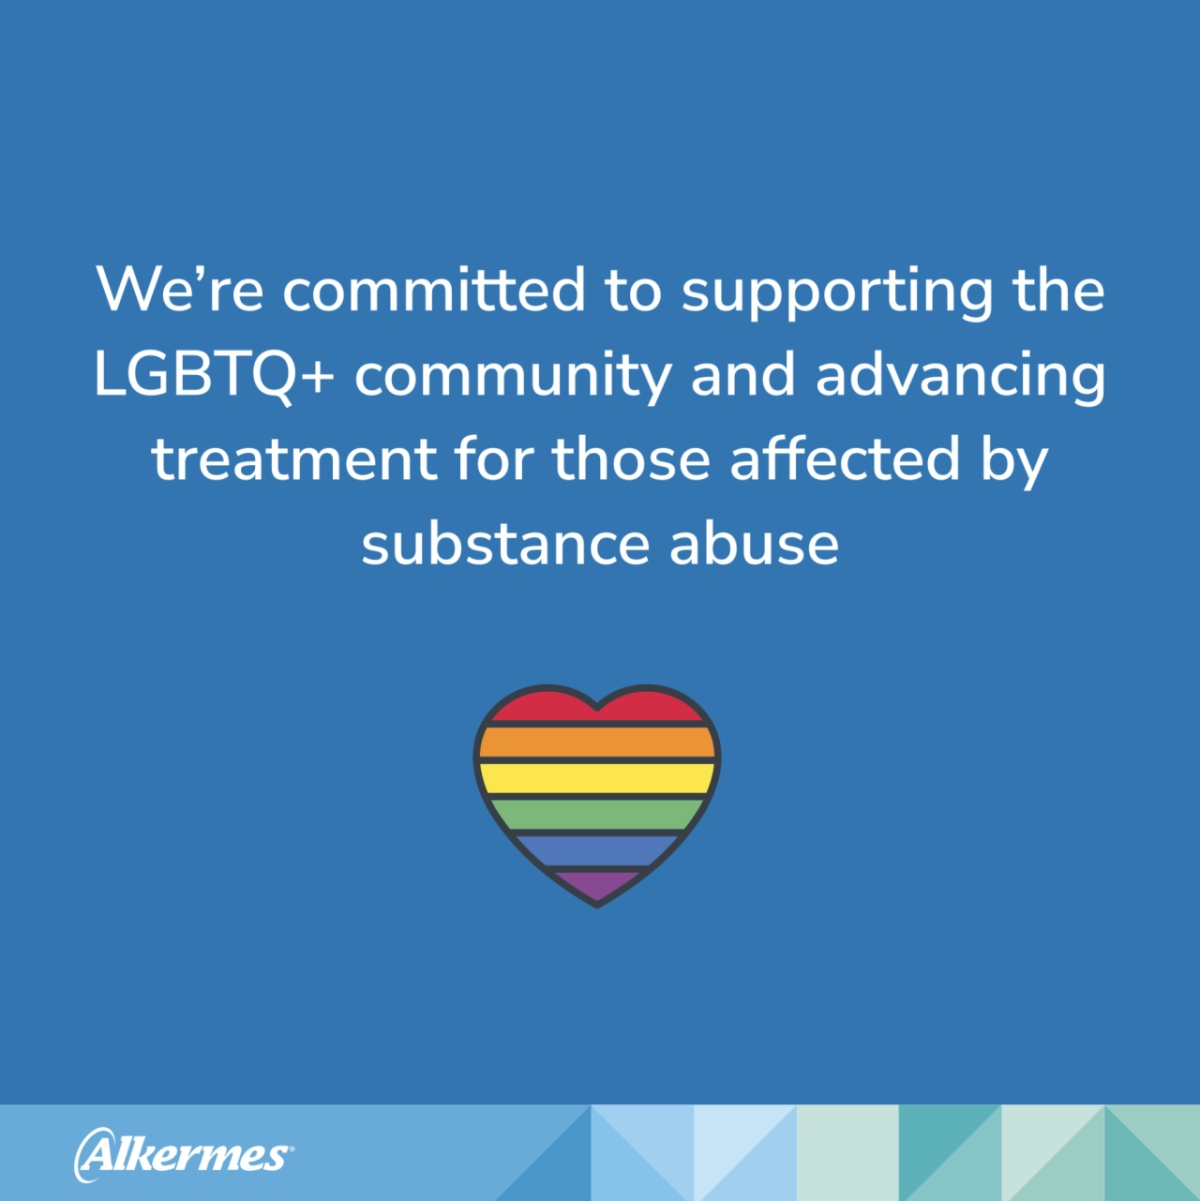 PDF slide with the text "We’re committed to supporting the LGBTQ+ community and advancing treatment for those affected by substance abuse"